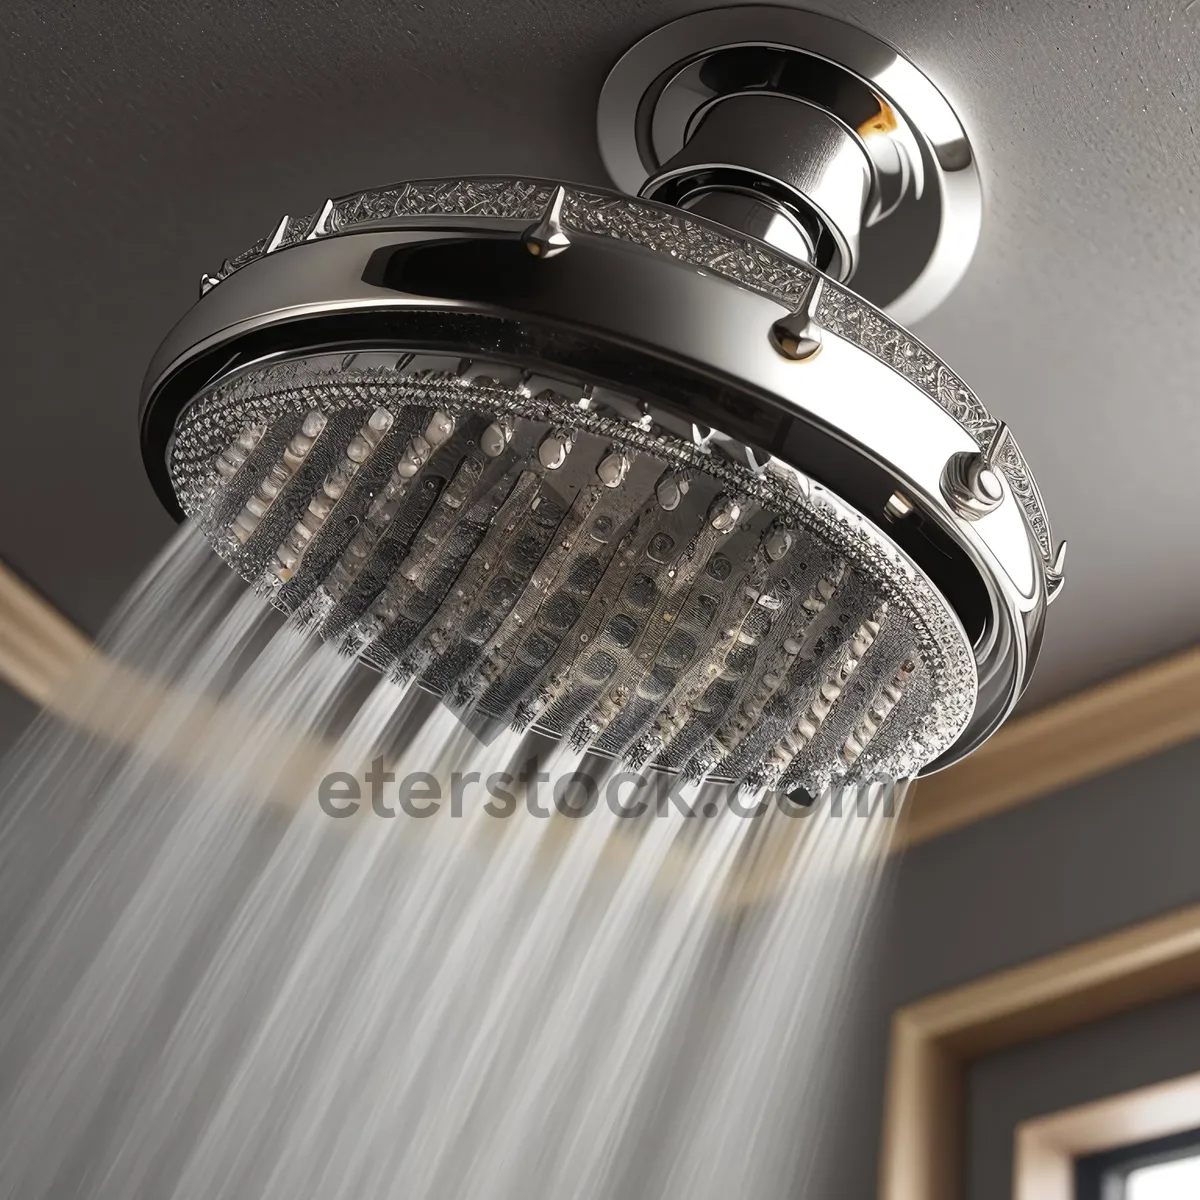 Picture of Modern Shower Fixture in Architectural Building